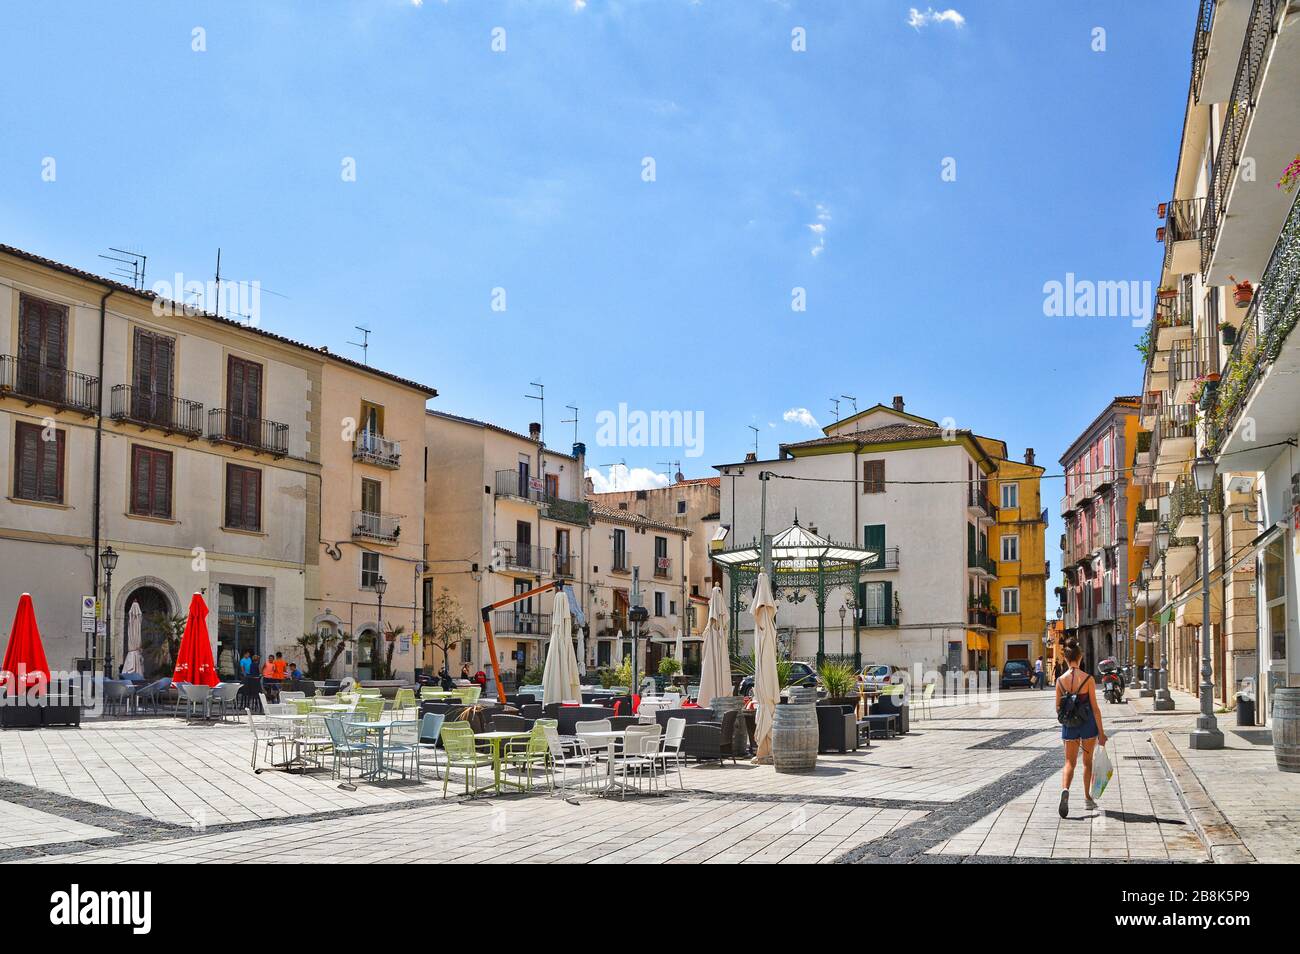 A square among the characteristic houses of the historic center of Isernia, Italy Stock Photo